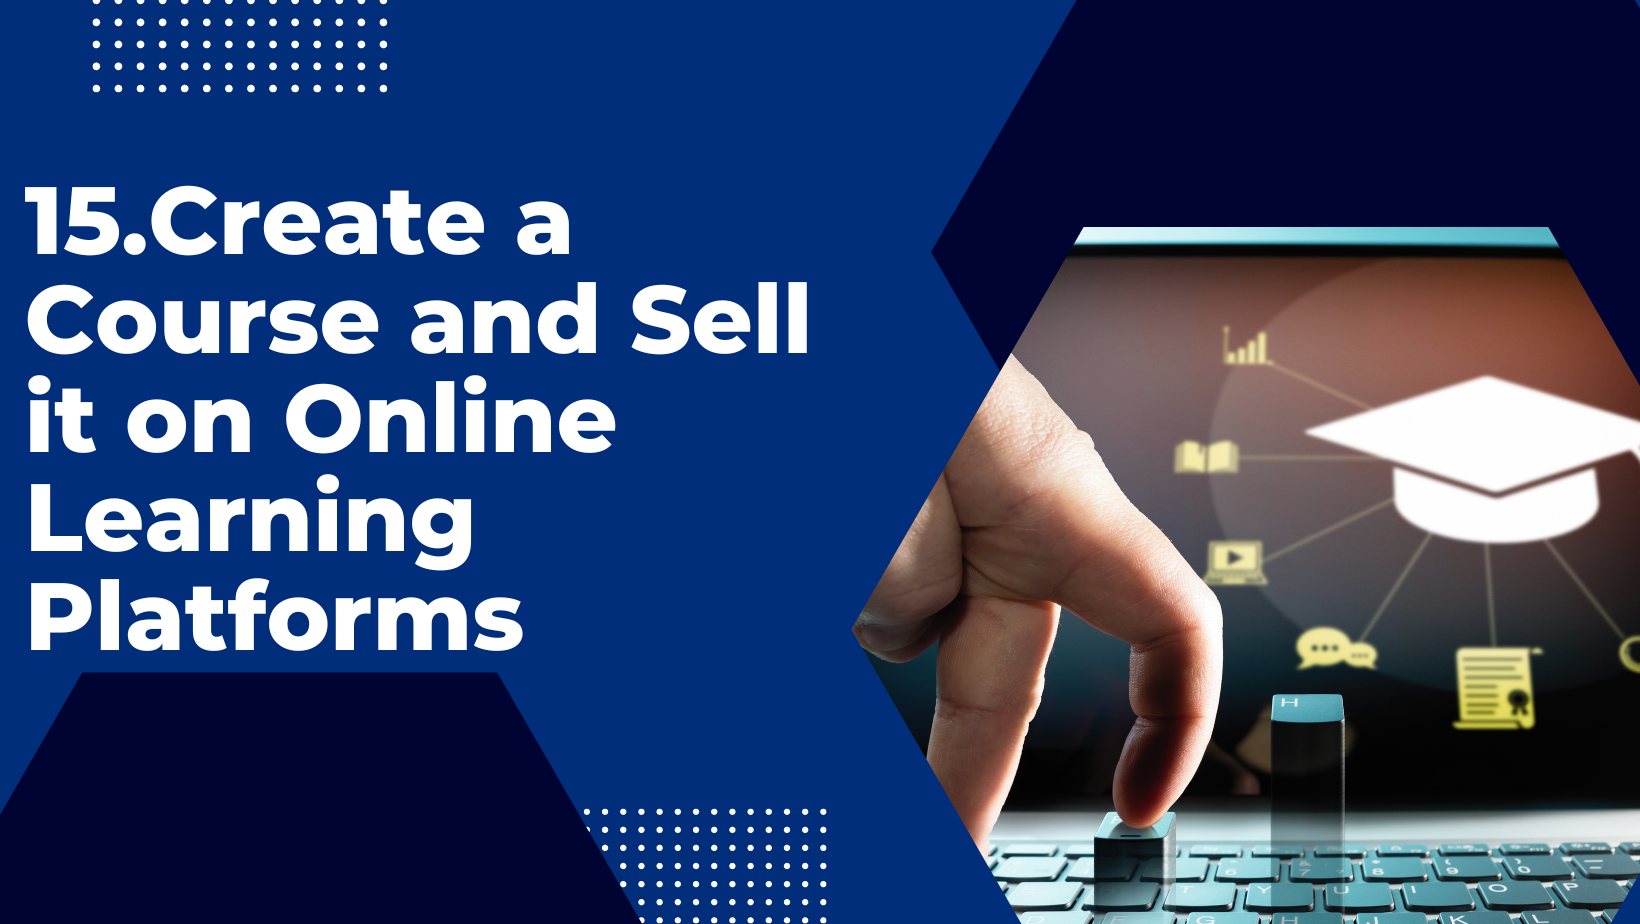 Create a Course and Sell it on Online Learning Platforms